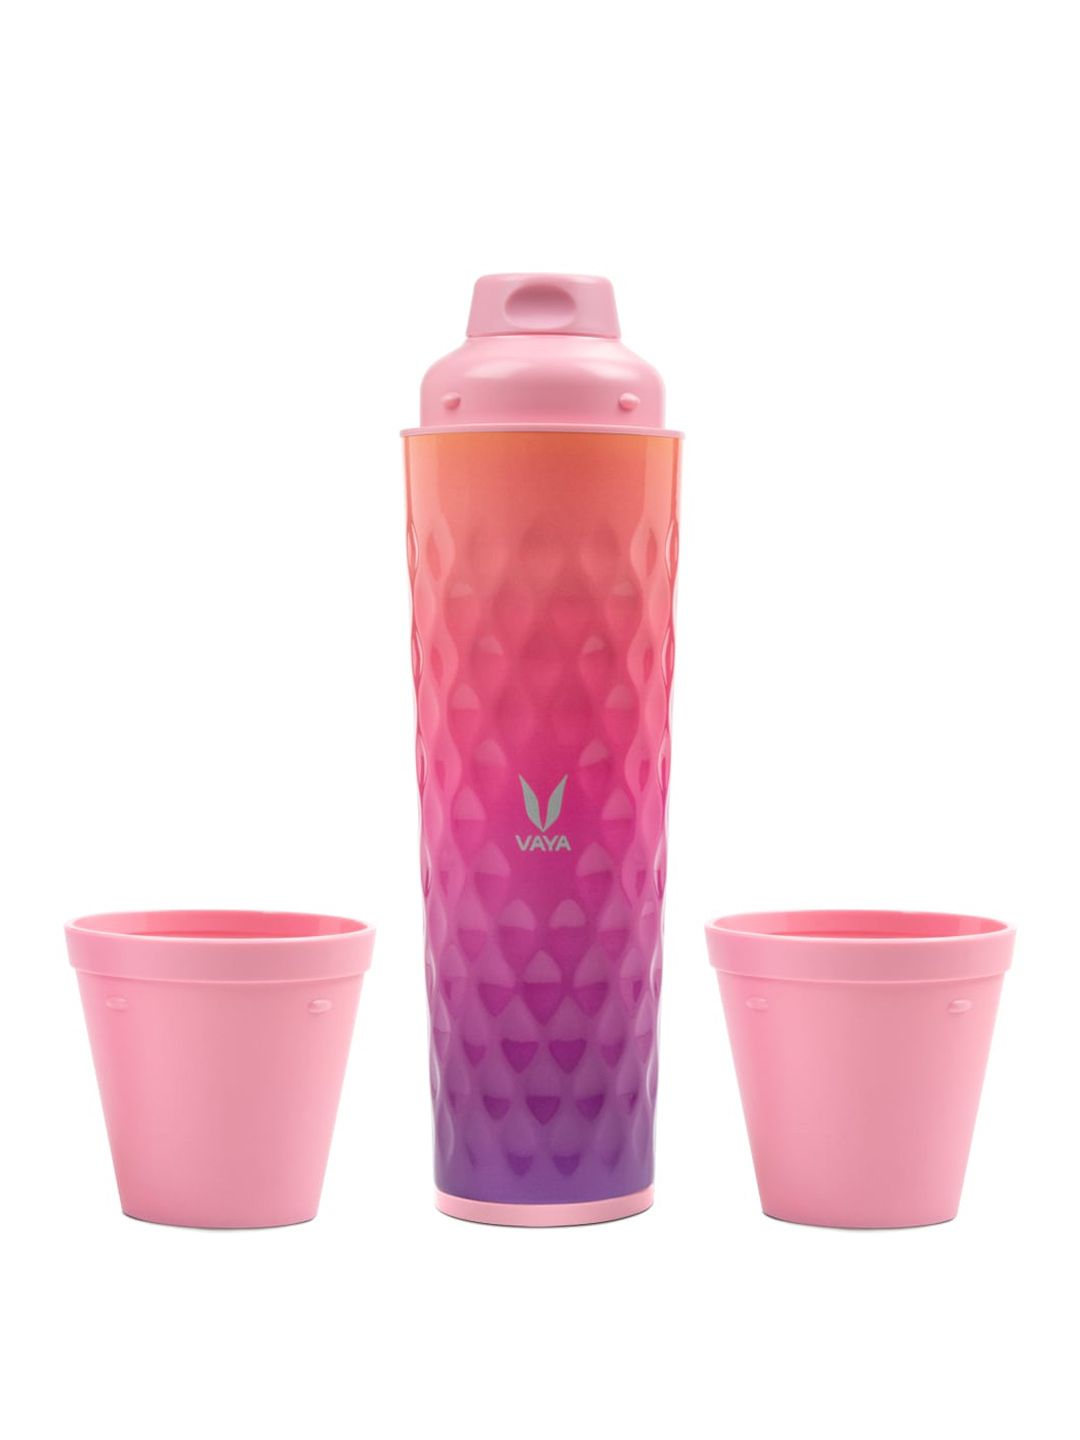 Vaya Pink Solid Stainless Steel Water Bottle Price in India